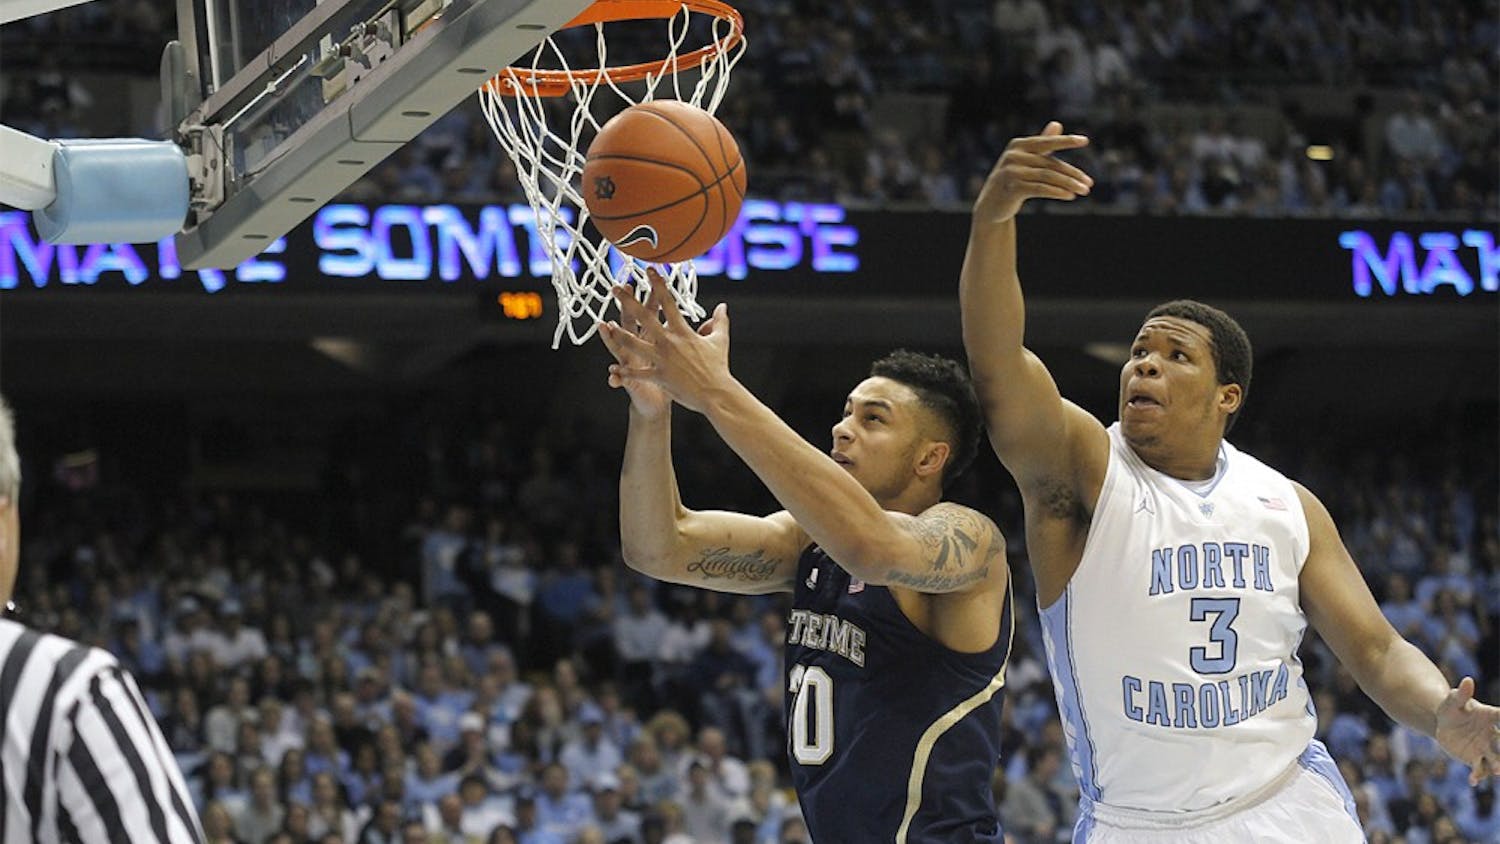 Freshman forward Kennedy Meeks (3) tries to rebound over a Notre Dame player. Carolina defeated Notre Dame 63-61 on Monday in the Dean Dome. 